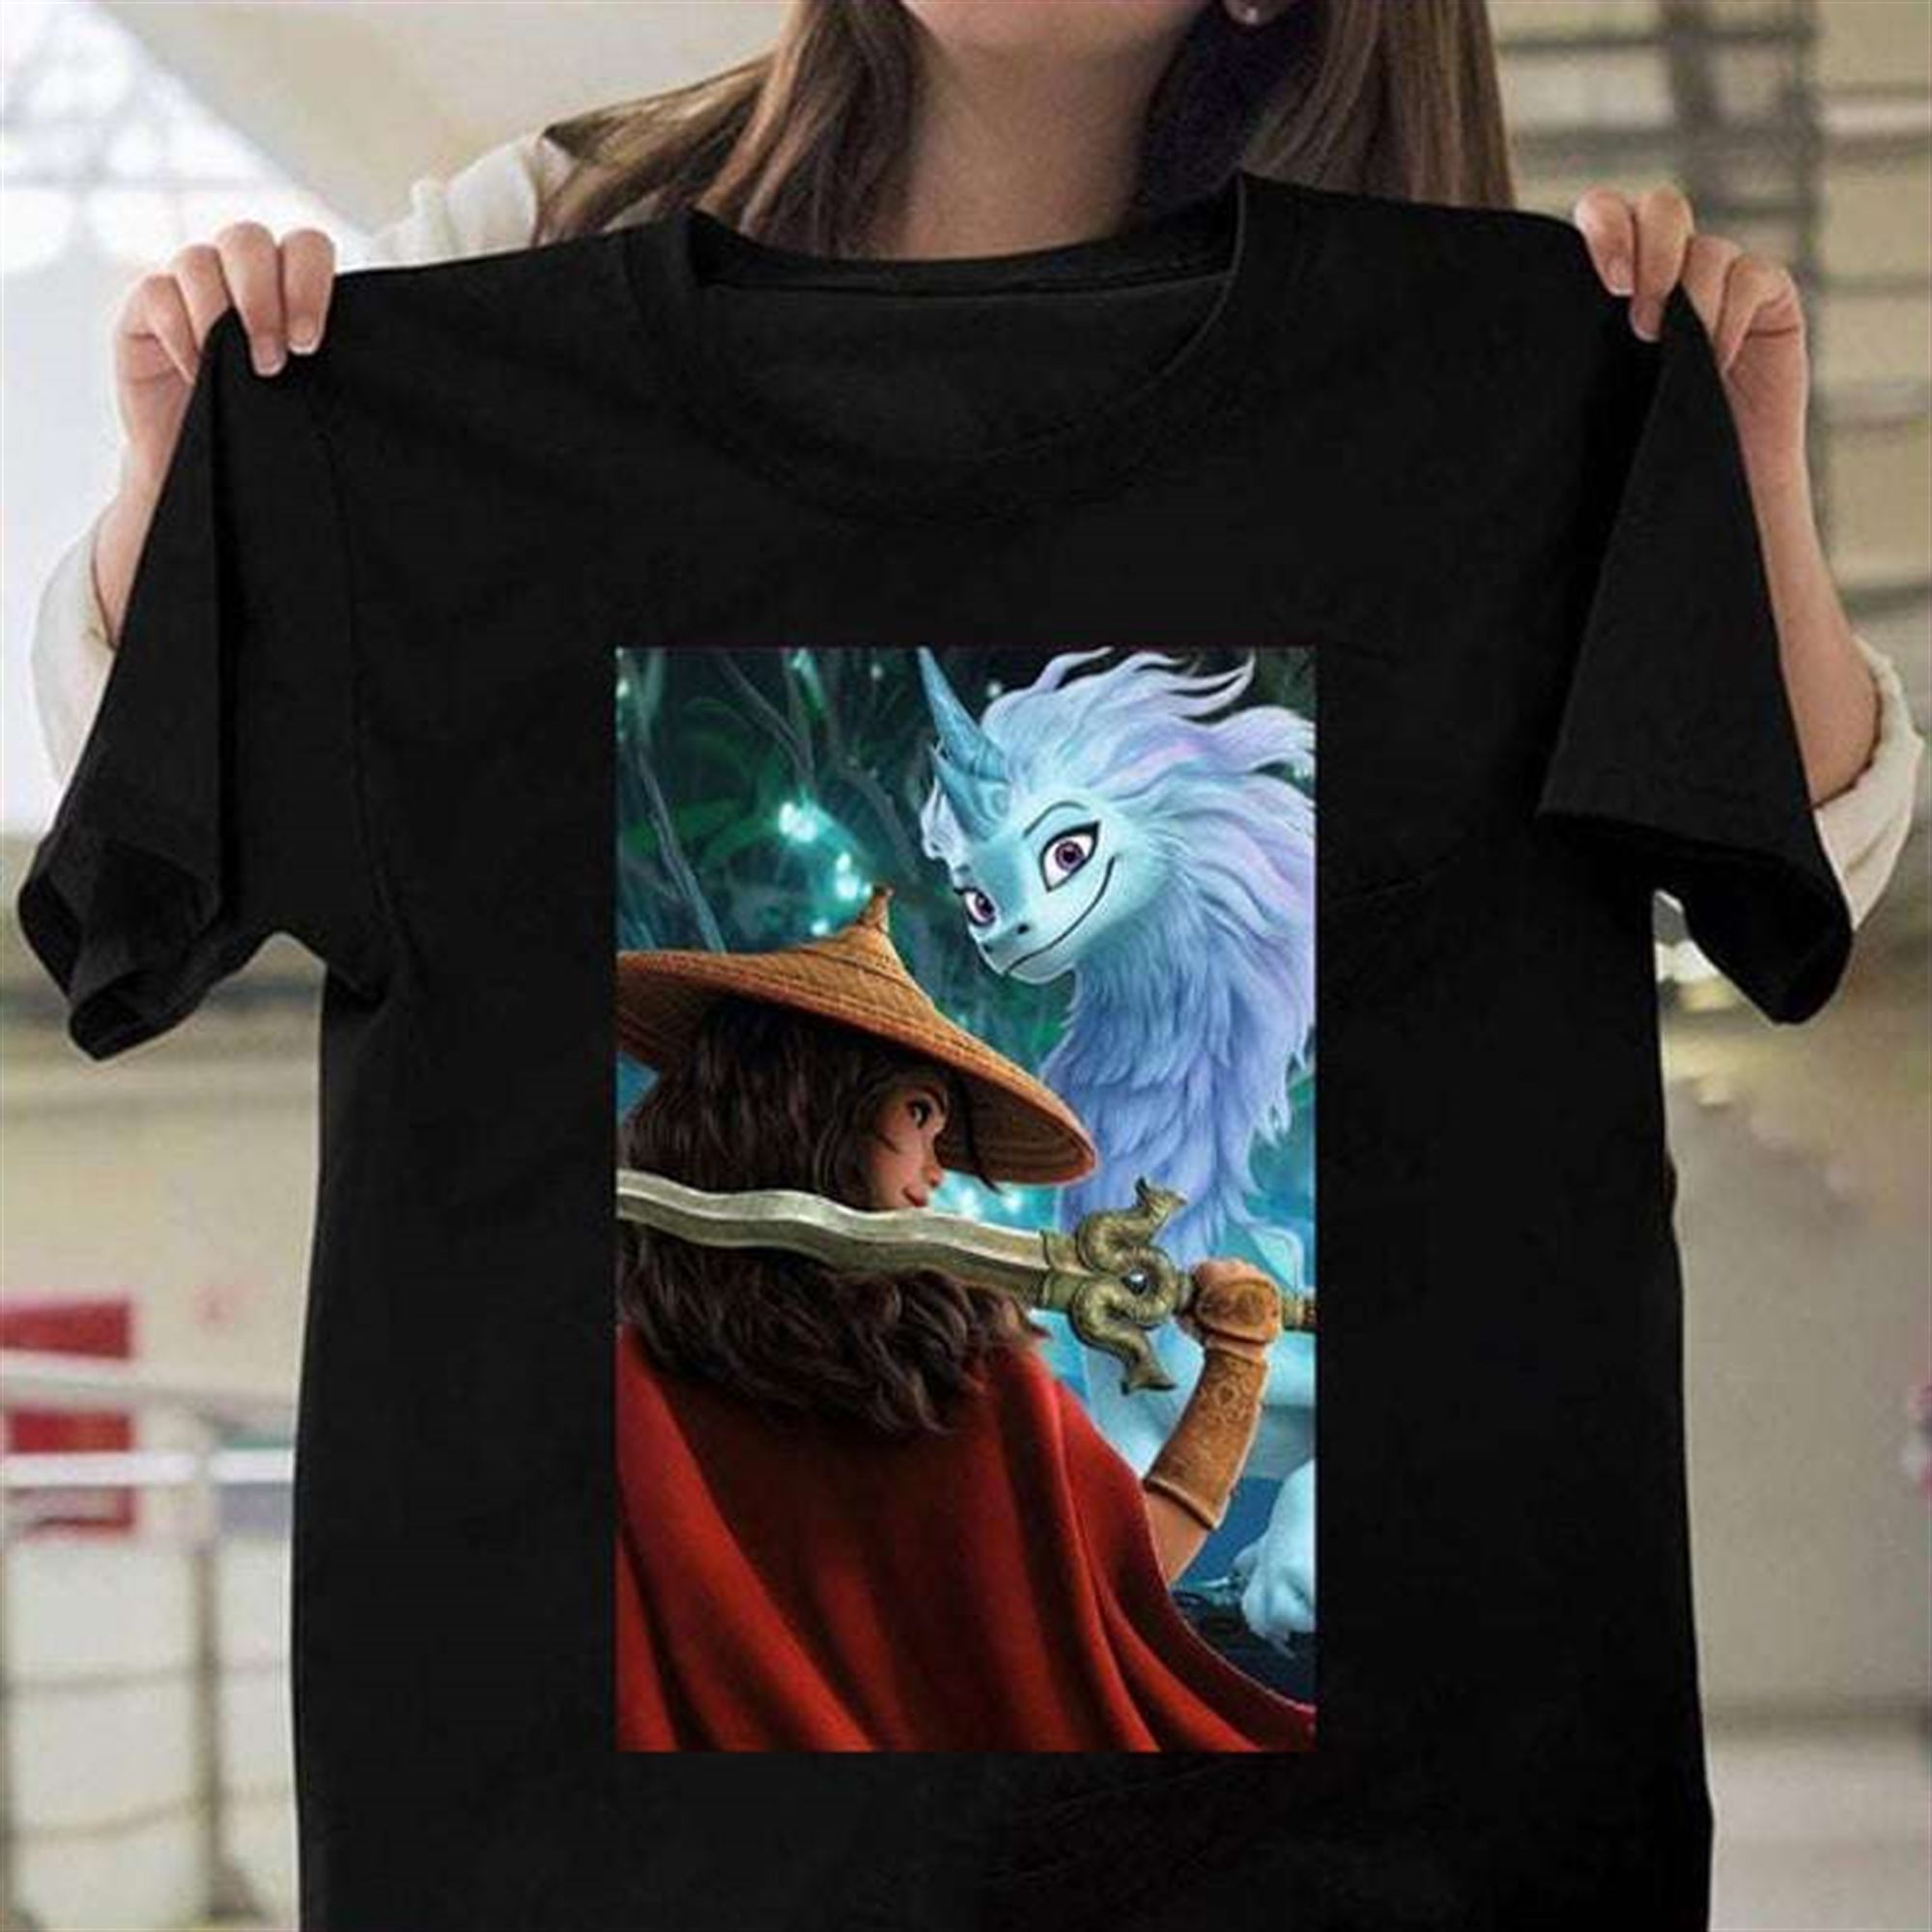 Raya And The Last Dragon Unisex T Shirt Full Size Up To 5xl